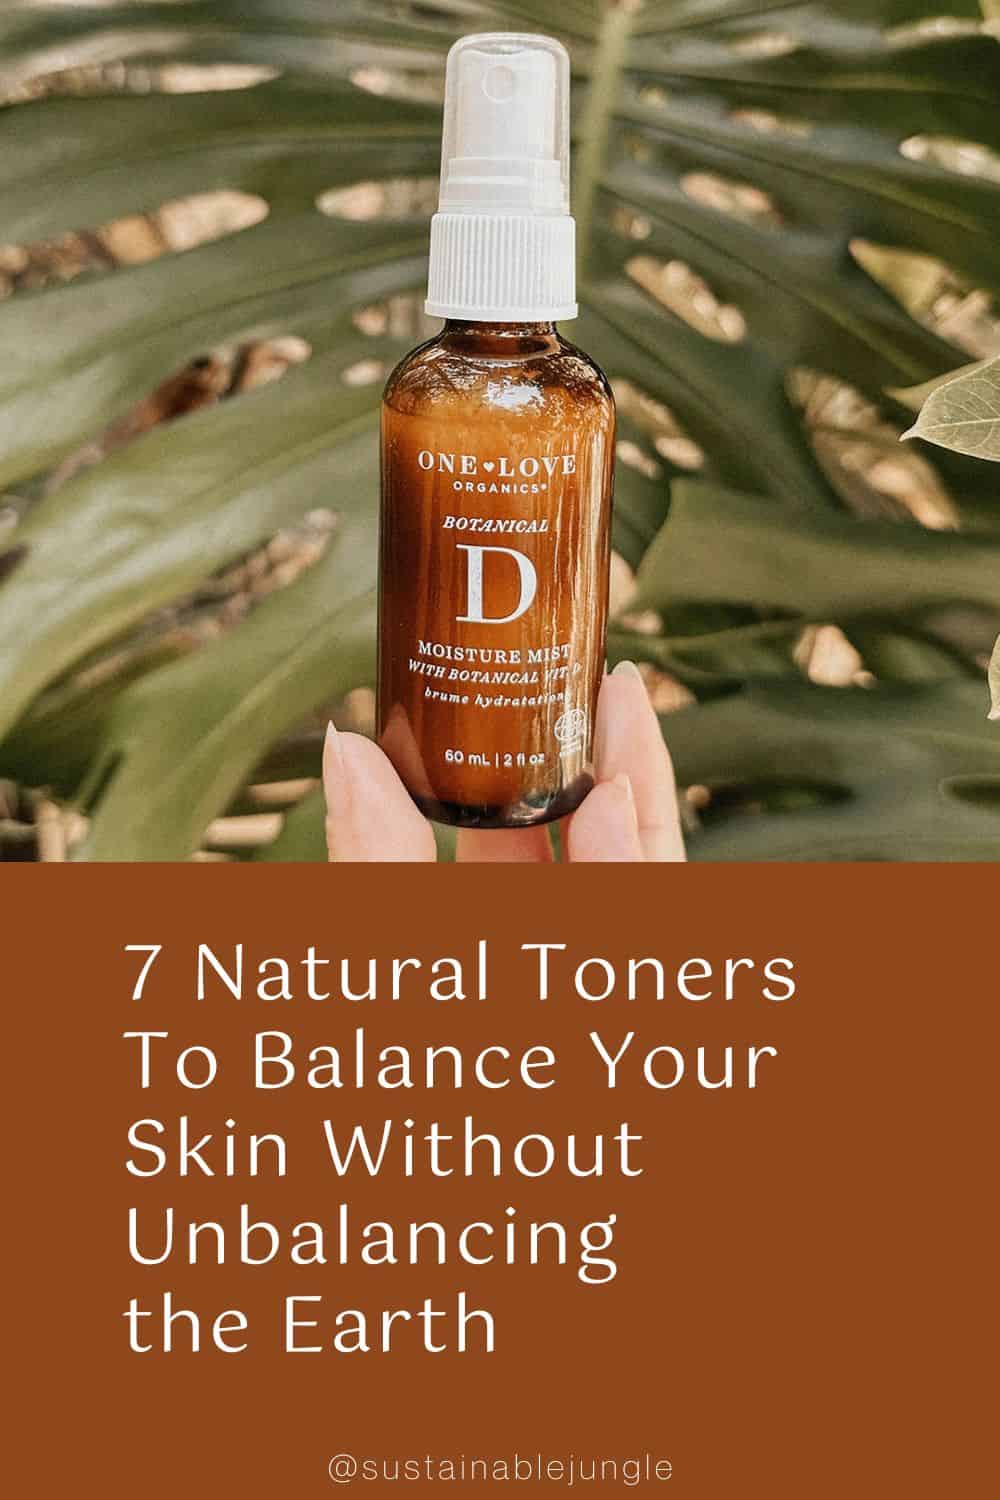 7 Natural Toners To Balance Your Skin Without Unbalancing the Earth Image by One Love Organics #naturaltoners #naturalskintoner #naturaltonerforskin #organictoners #bestorganicfacetoner #naturalfacetoner #sustainablejungle